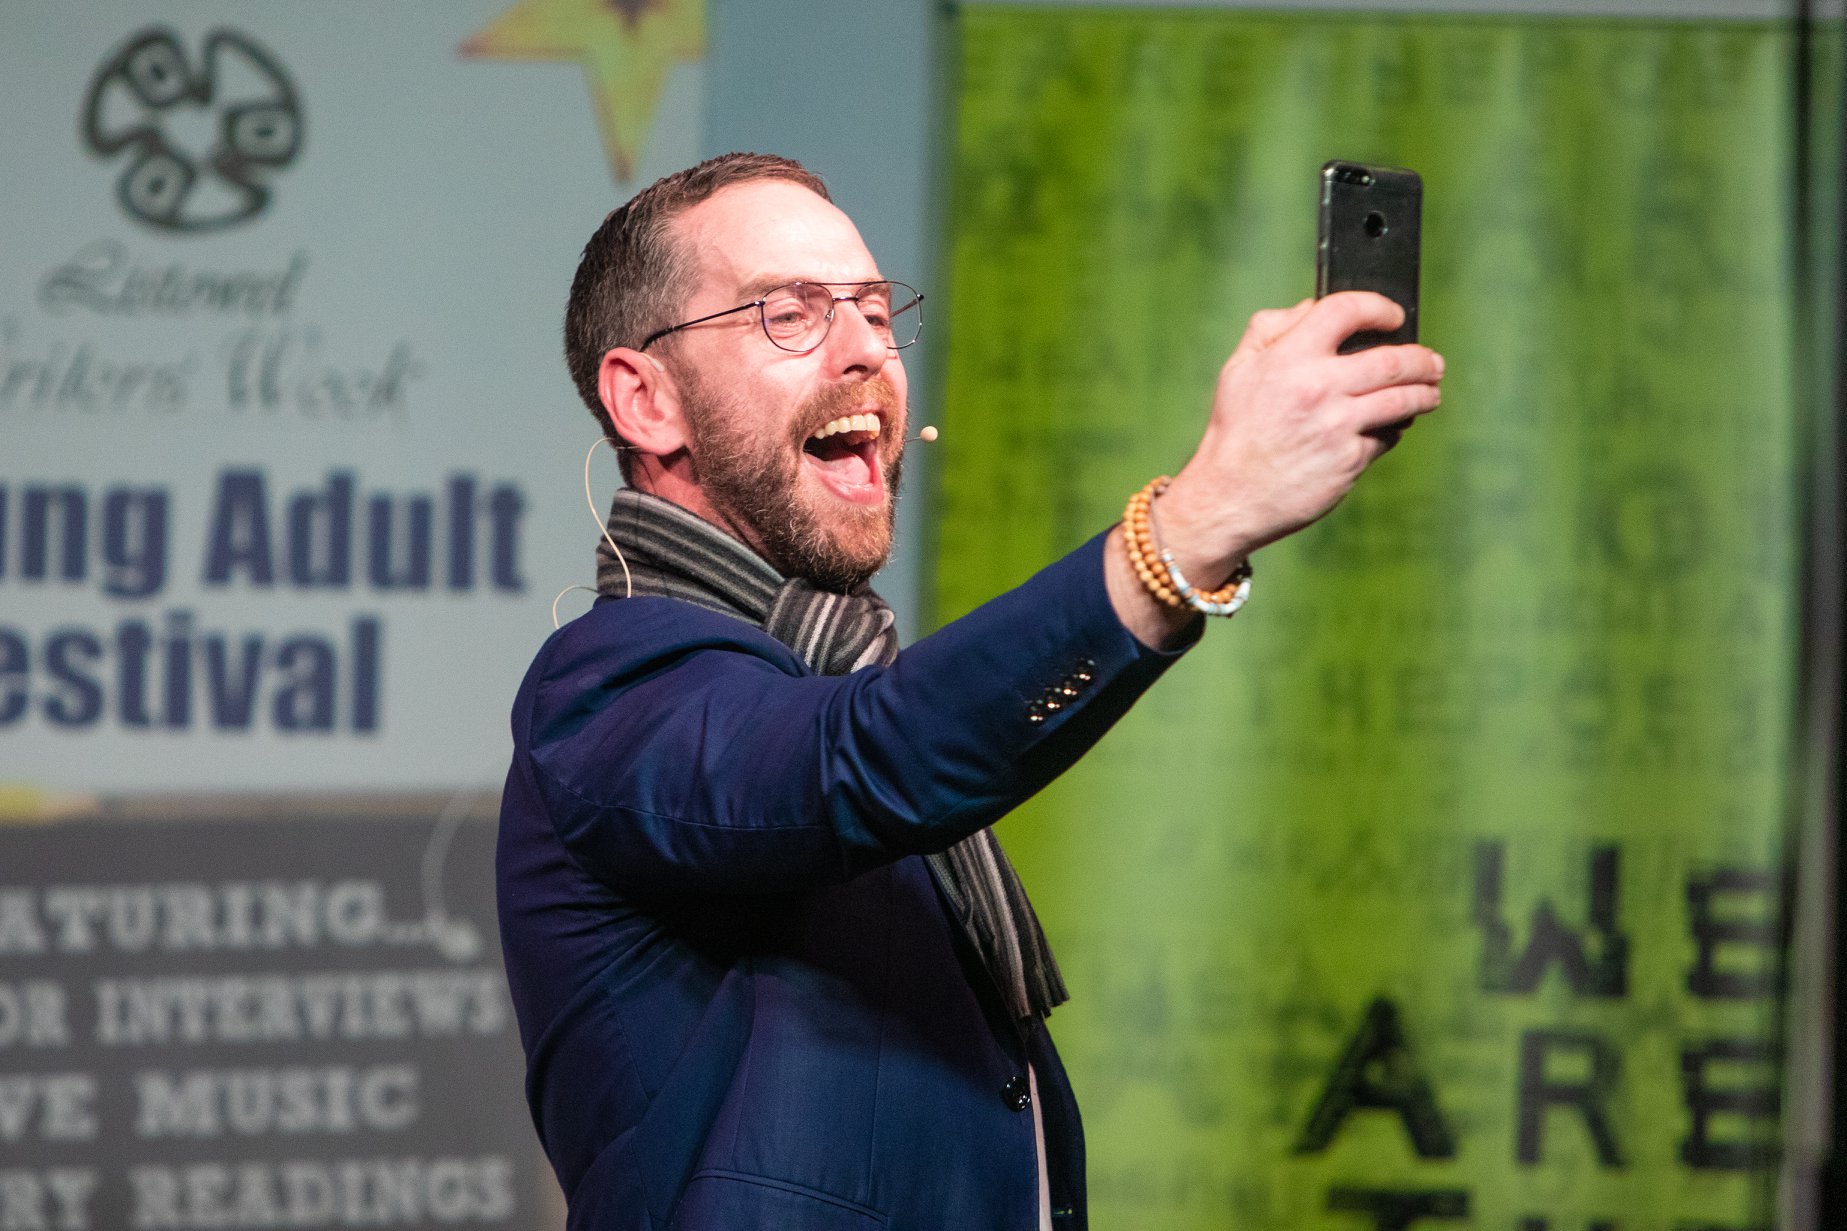 Gary Cunningham takes a photo at YABF 2018